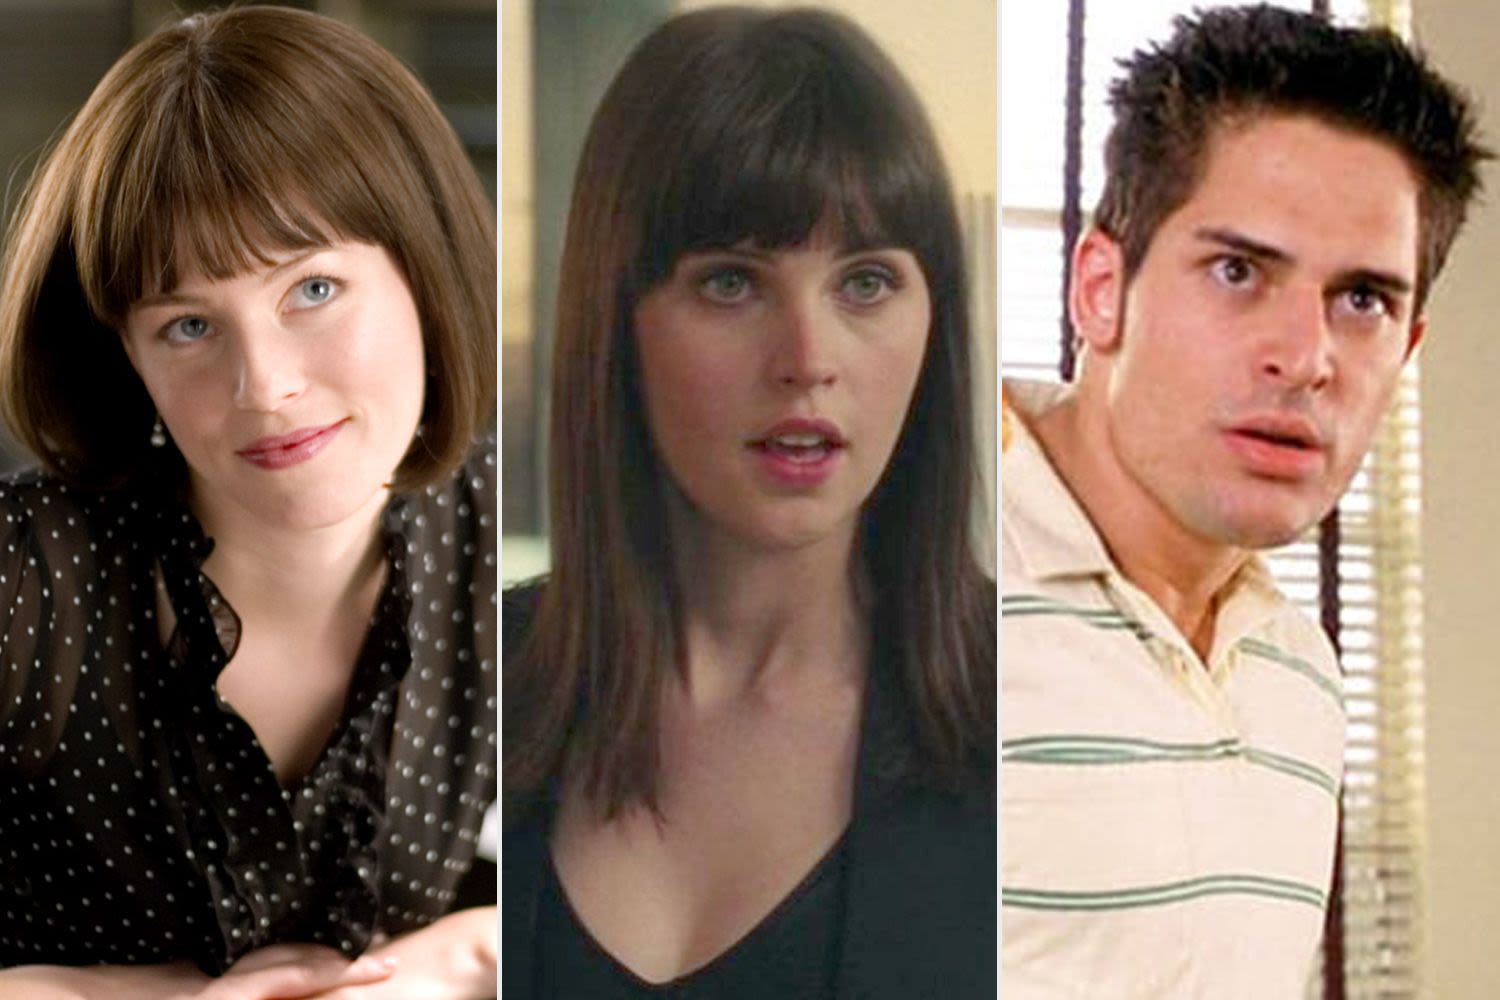 20 Stars You Forgot Were in the 'Spider-Man' Movies: From B.J. Novak to Bryce Dallas Howard